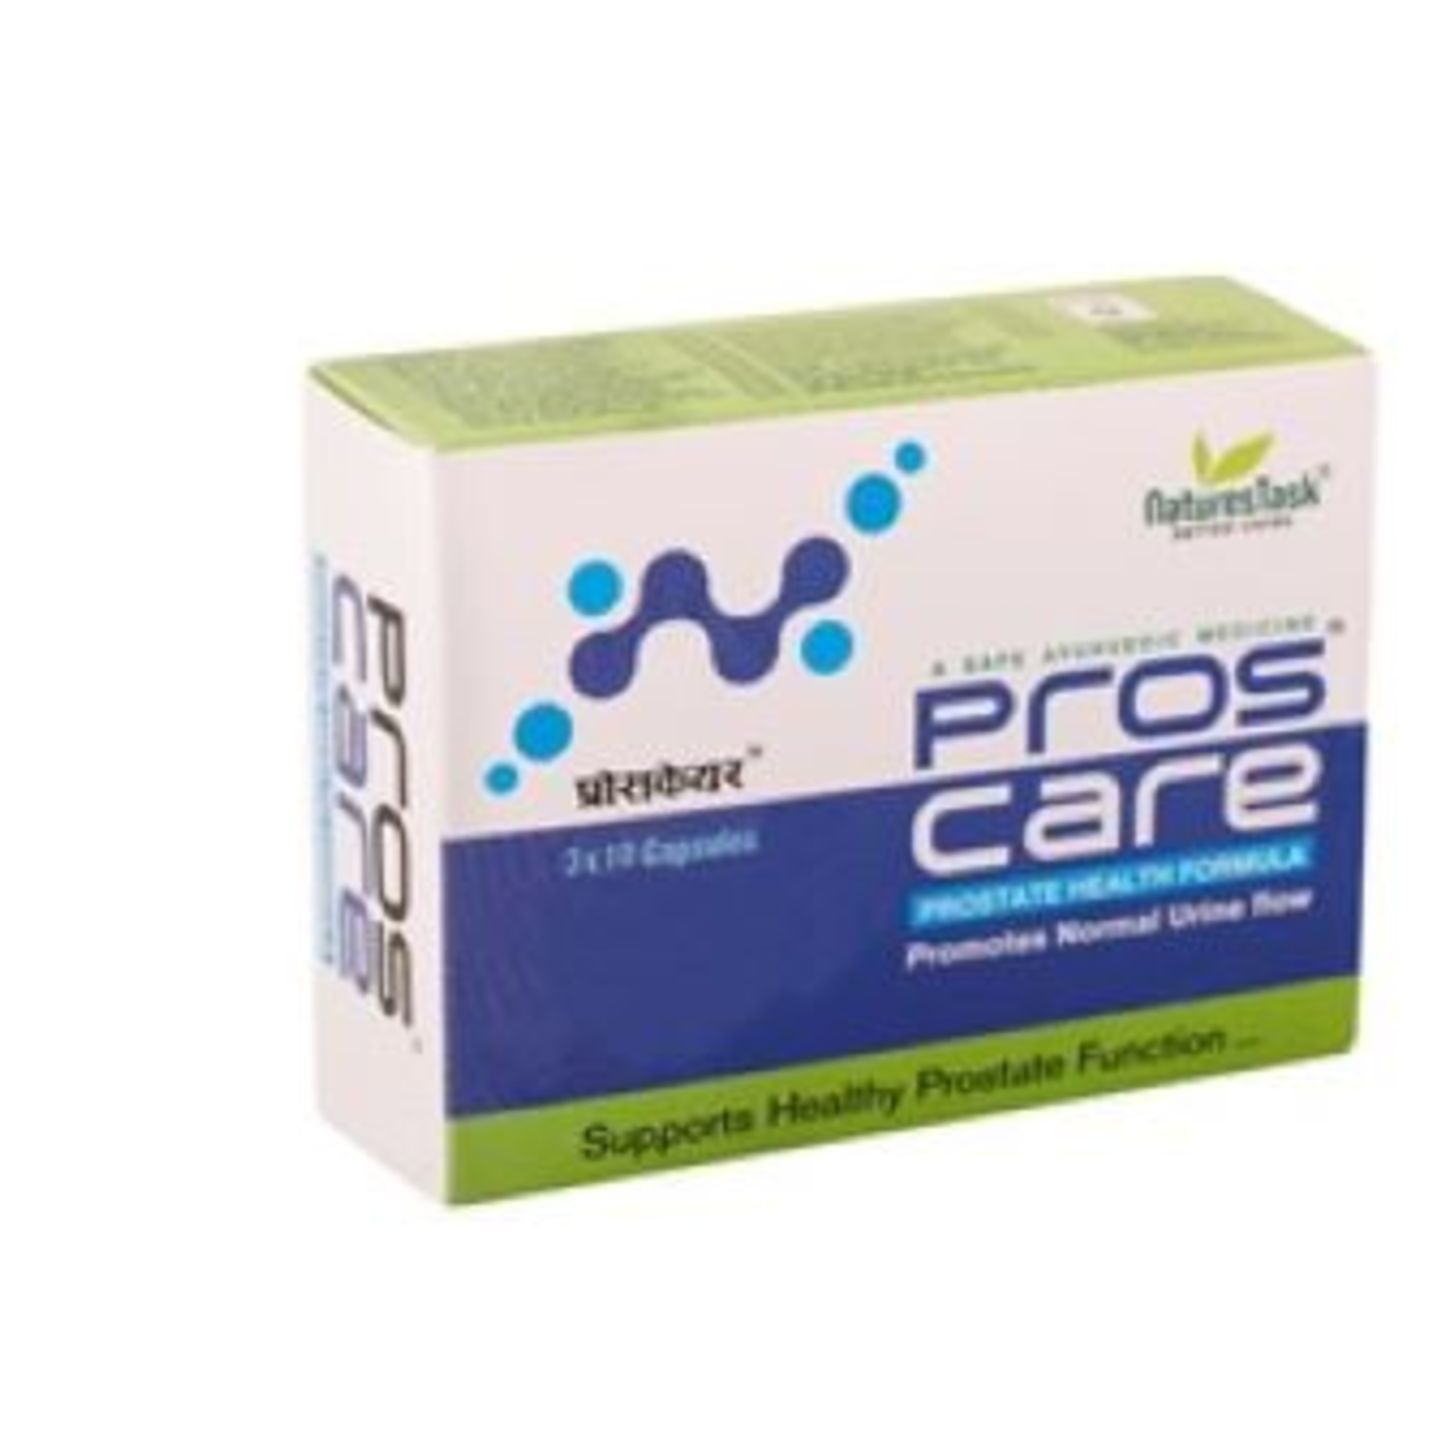 Proscare Prostate Management pack of 30 capsules